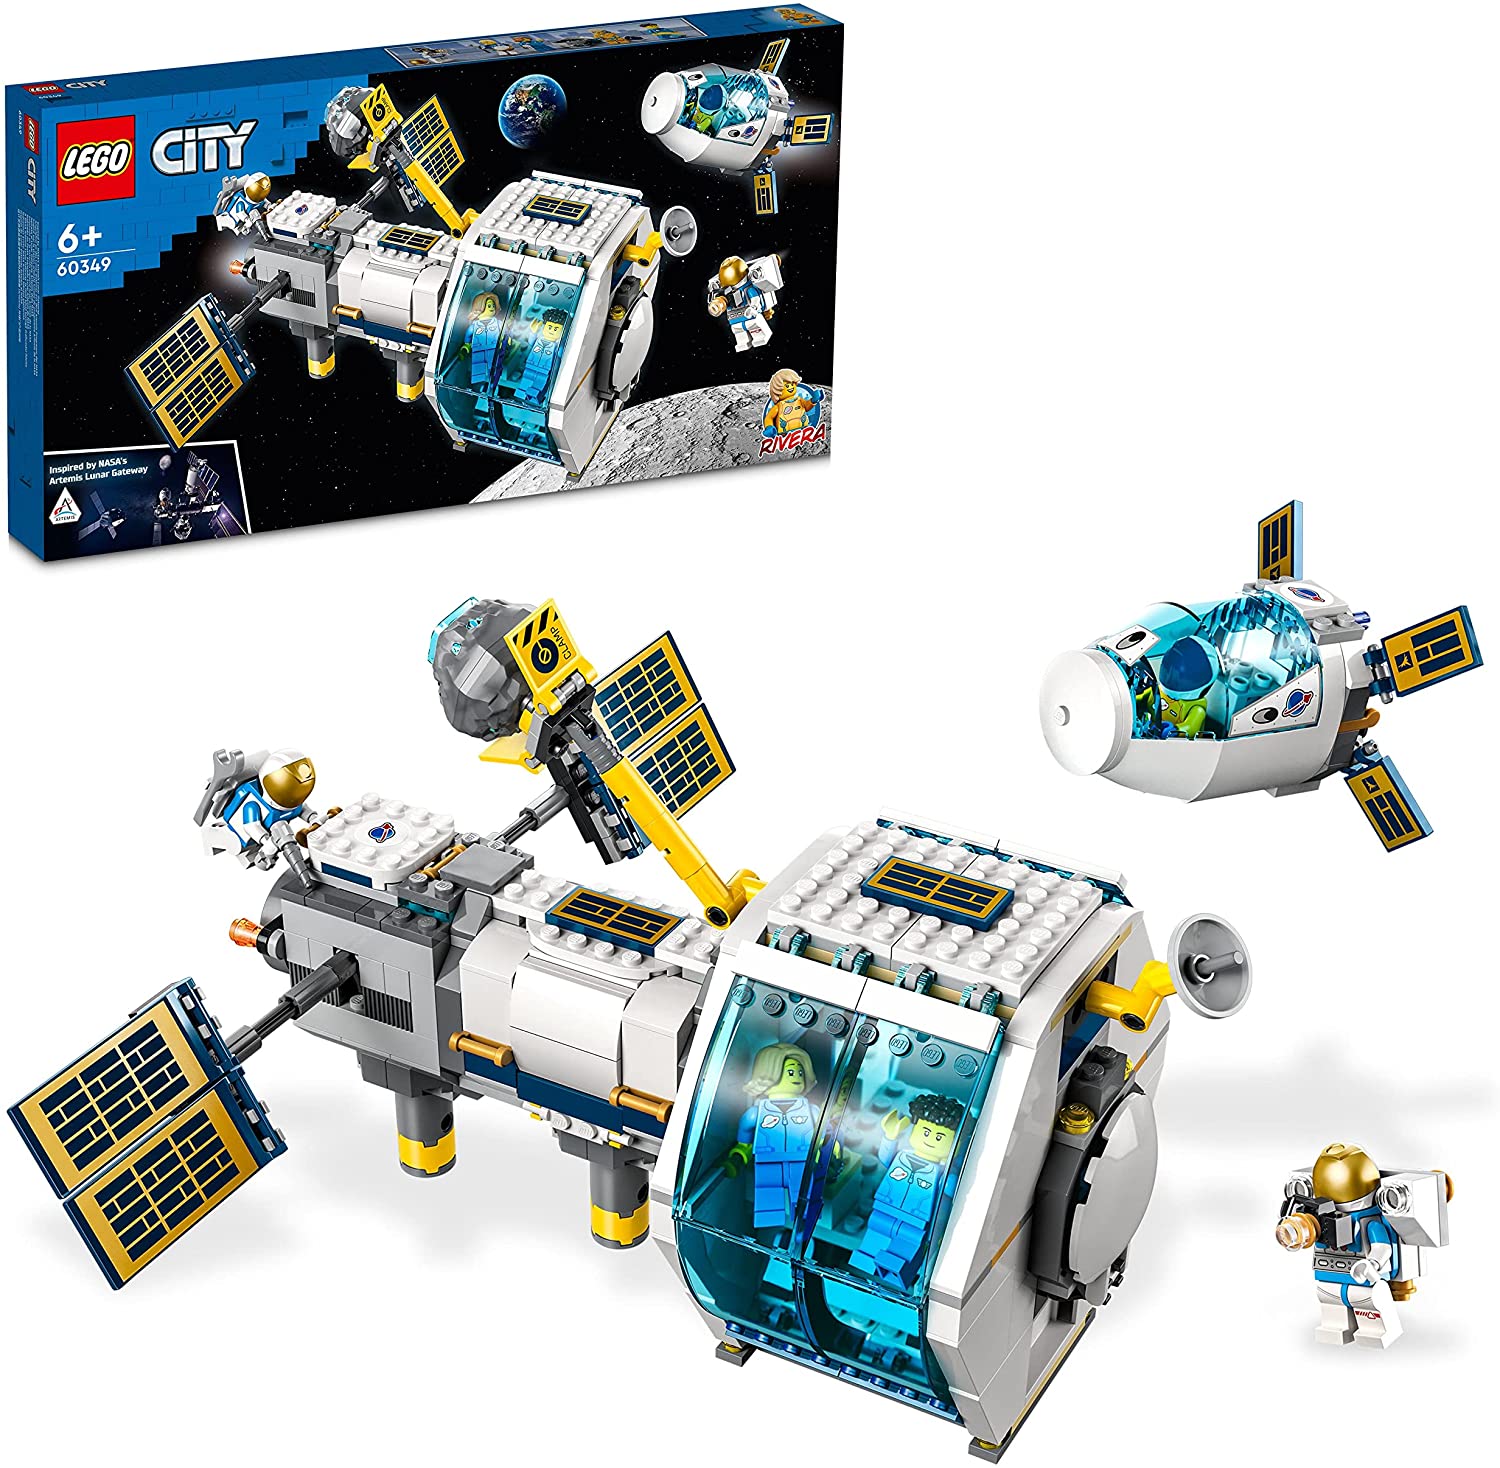 LEGO 60349 City Moon Space Station Space Toy from the LEGO NASA Series with